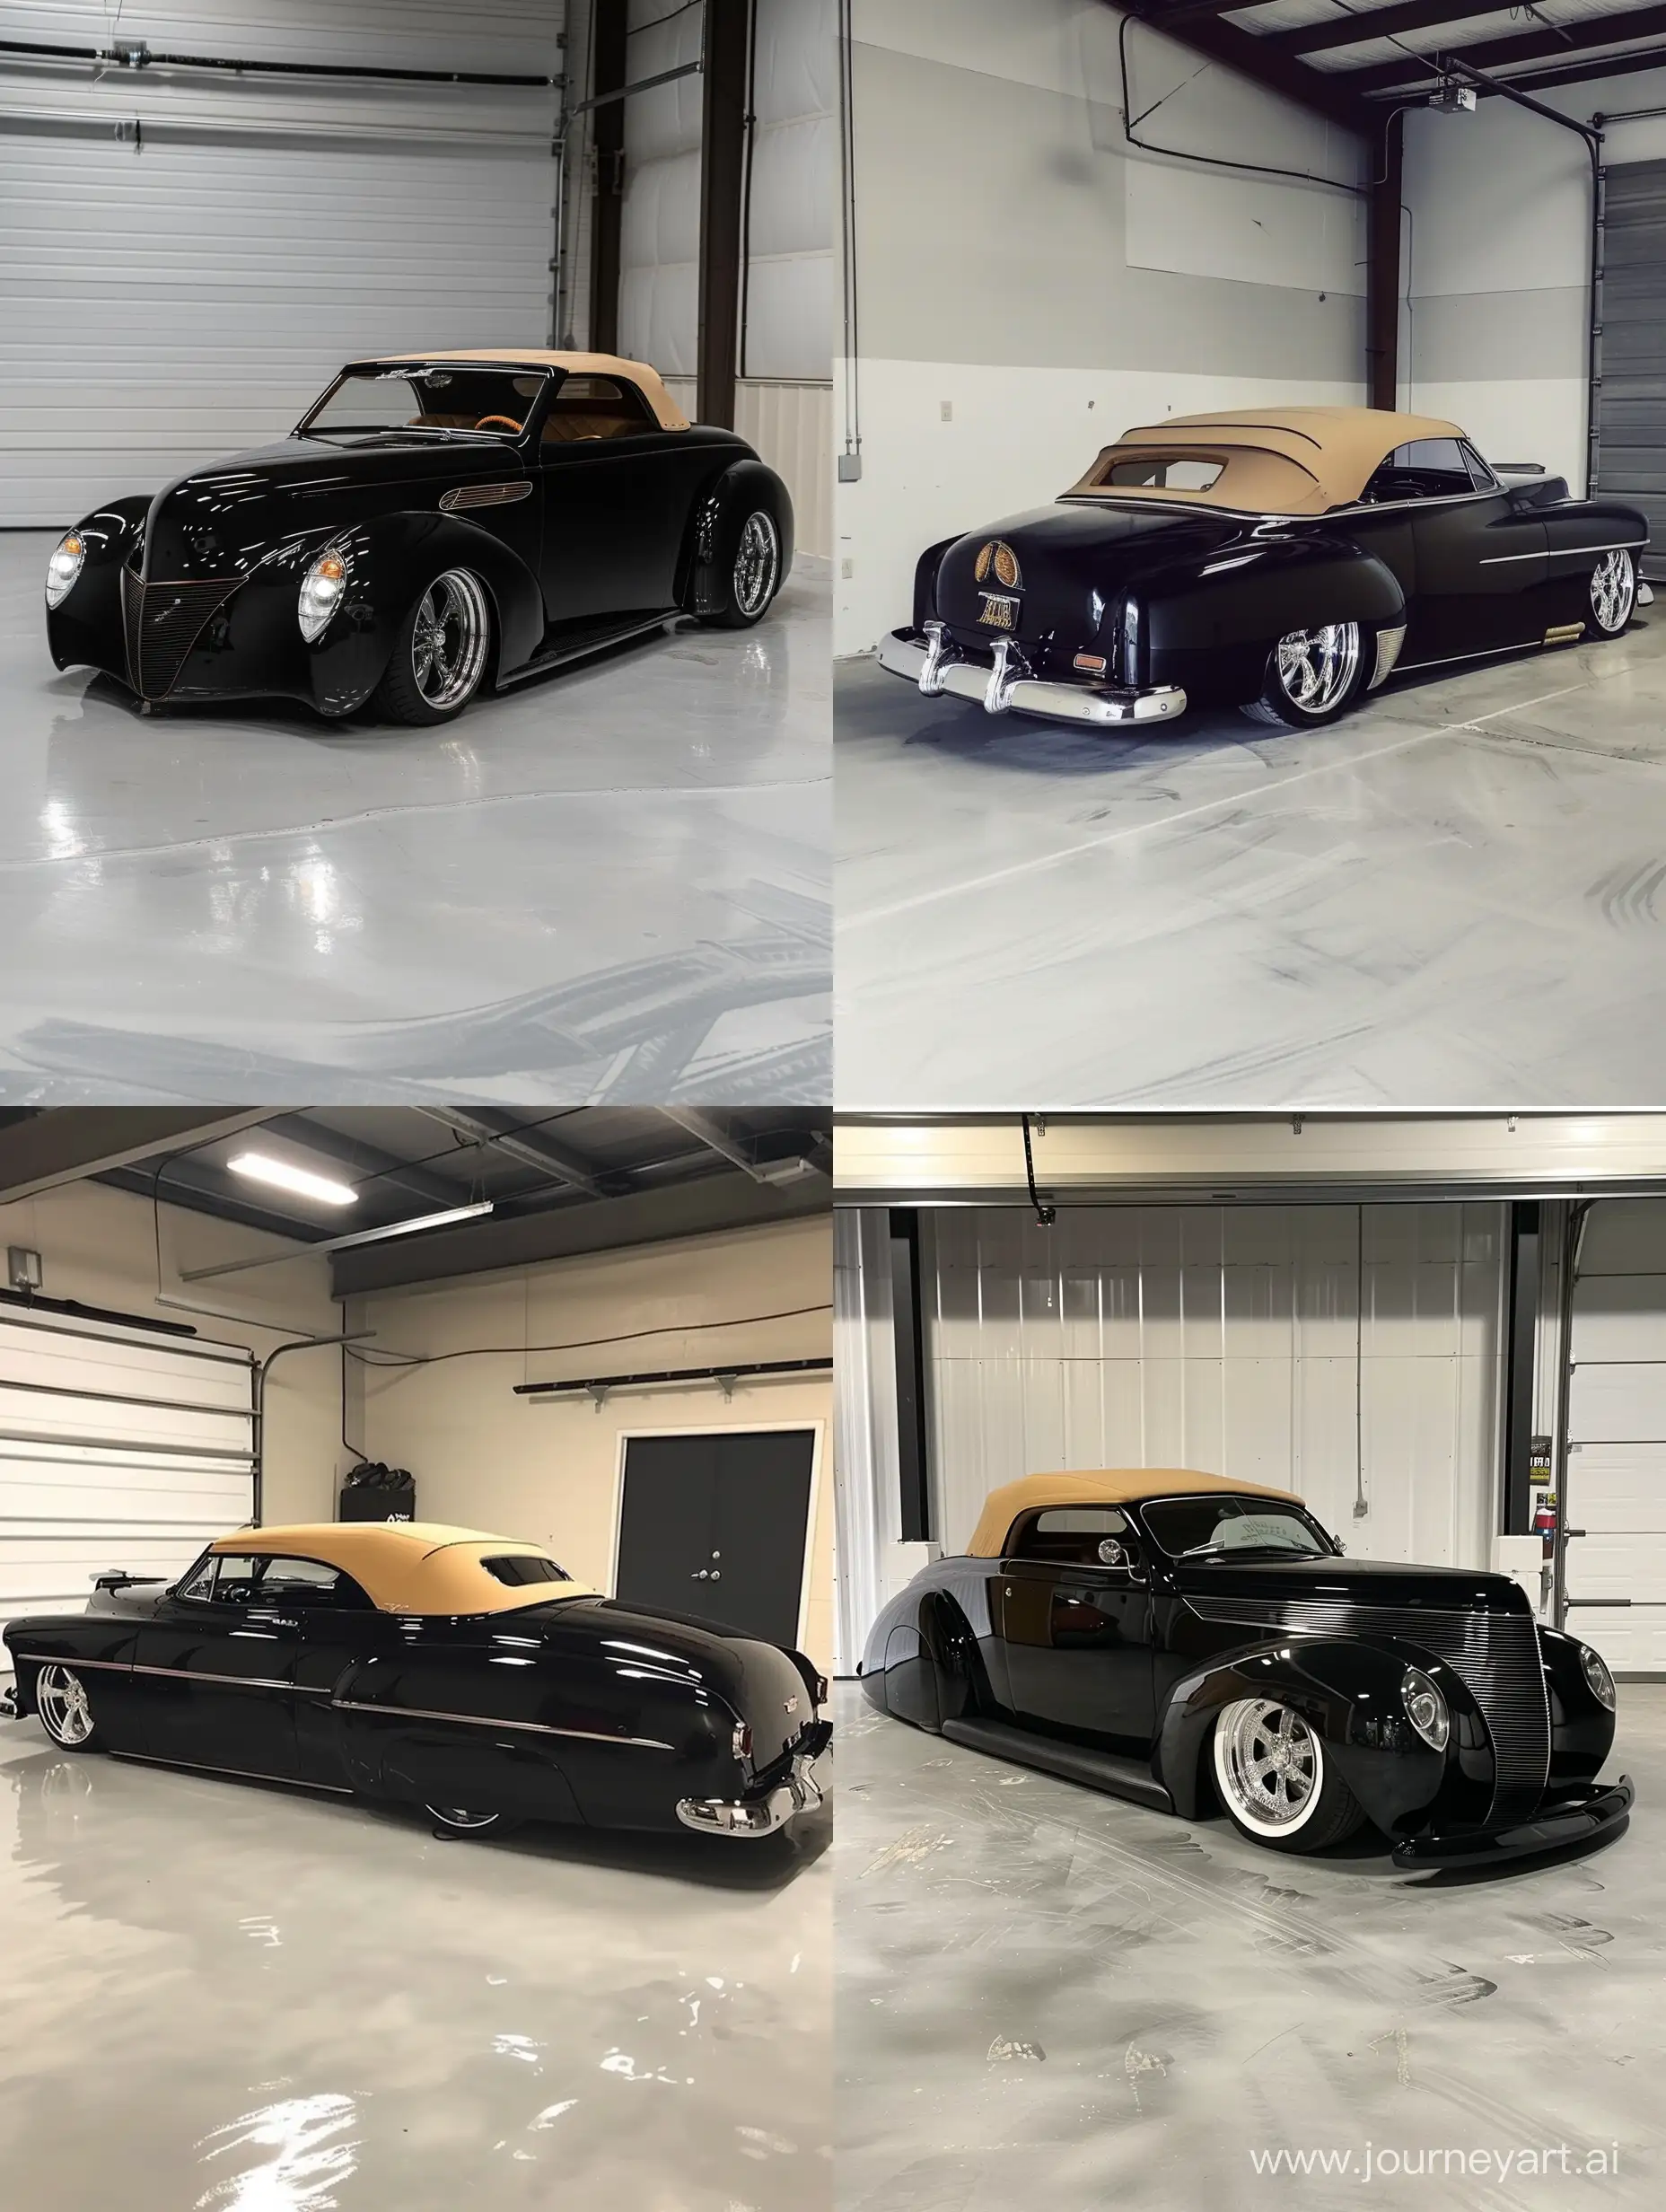 A black, old school car sits in a garage with white walls. The car has a tan top and is painted in black. It has chrome rims and is parked in front of a garage door.midjourney